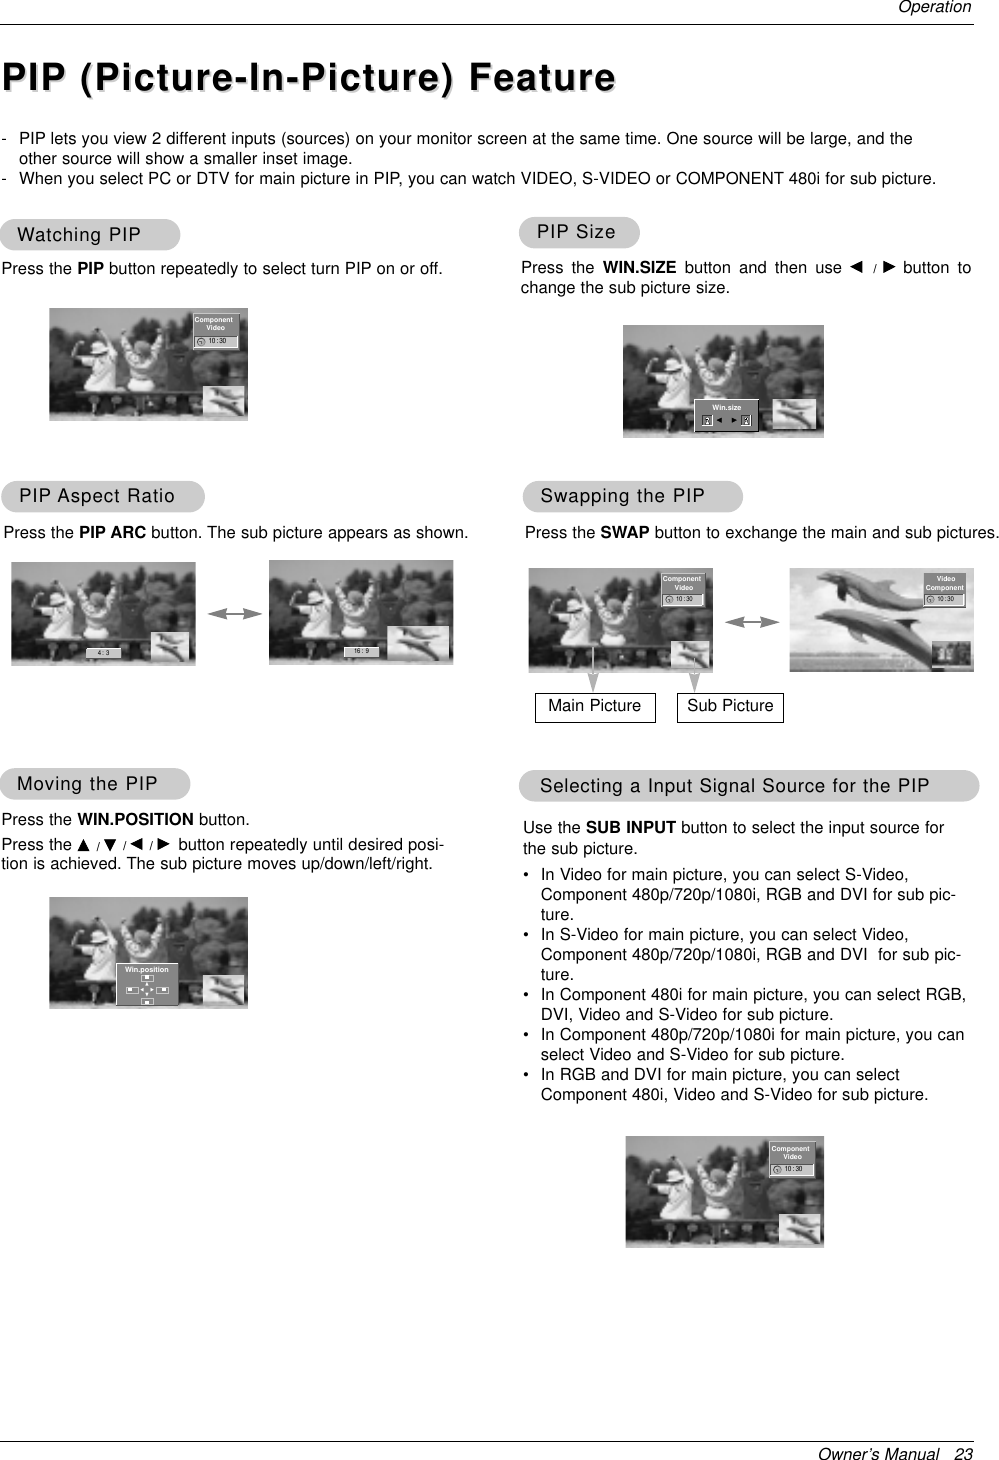 Owner’s Manual   23OperationWWatching PIPatching PIP- PIP lets you view 2 different inputs (sources) on your monitor screen at the same time. One source will be large, and theother source will show a smaller inset image.- When you select PC or DTV for main picture in PIP, you can watch VIDEO, S-VIDEO or COMPONENT 480i for sub picture.Press the PIP button repeatedly to select turn PIP on or off.PIPPIP SizeSizePress the WIN.SIZE button and then use F  /  Gbutton tochange the sub picture size.PIPPIP Aspect RatioAspect RatioPress the PIP ARC button. The sub picture appears as shown.Moving the PIPMoving the PIPPress the WIN.POSITION button. Press the D / E/ F / Gbutton repeatedly until desired posi-tion is achieved. The sub picture moves up/down/left/right.Swapping the PIPSwapping the PIPPress the SWAP button to exchange the main and sub pictures.Selecting a Input Signal Source for the PIPSelecting a Input Signal Source for the PIPUse the SUB INPUT button to select the input source forthe sub picture.•In Video for main picture, you can select S-Video,Component 480p/720p/1080i, RGB and DVI for sub pic-ture.•In S-Video for main picture, you can select Video,Component 480p/720p/1080i, RGB and DVI  for sub pic-ture.•In Component 480i for main picture, you can select RGB,DVI, Video and S-Video for sub picture.•In Component 480p/720p/1080i for main picture, you canselect Video and S-Video for sub picture.•In RGB and DVI for main picture, you can selectComponent 480i, Video and S-Video for sub picture.Main Picture Sub Picture◀▶▲▼10 : 30 10 : 3010 : 304 :  3 16 :  9Win.positionComponentVideoComponentVideoVideoComponentPIPPIP (Picture-In-Picture) Feature(Picture-In-Picture) Feature10 : 30ComponentVideoWin.sizeF G